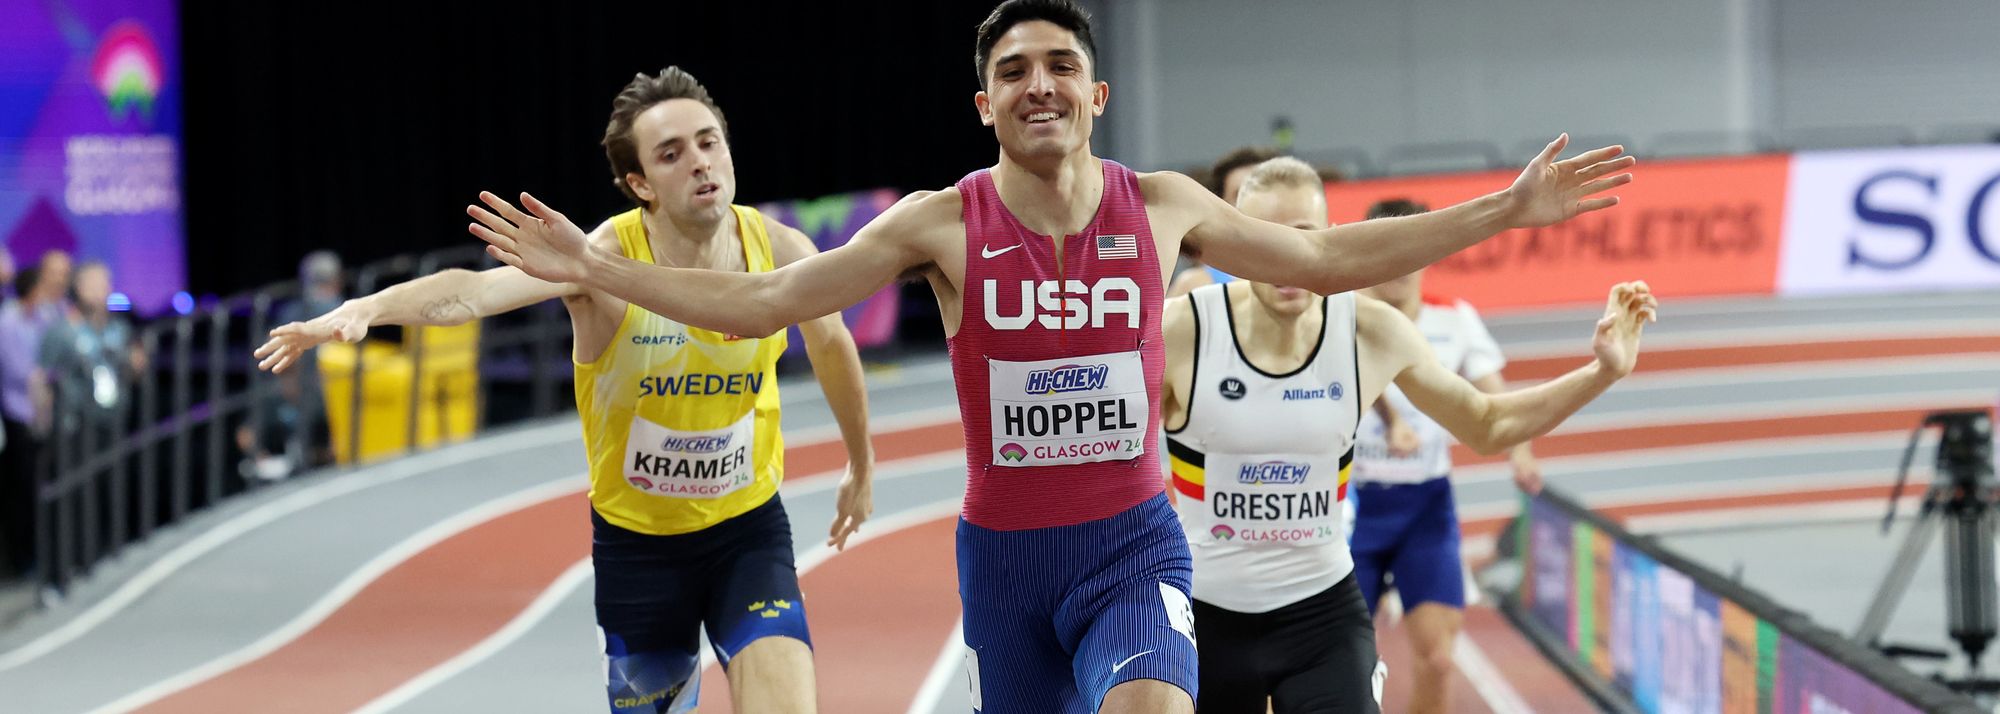 USA's Bryce Hoppel kept a cool head to win the men's 800m in Glasgow